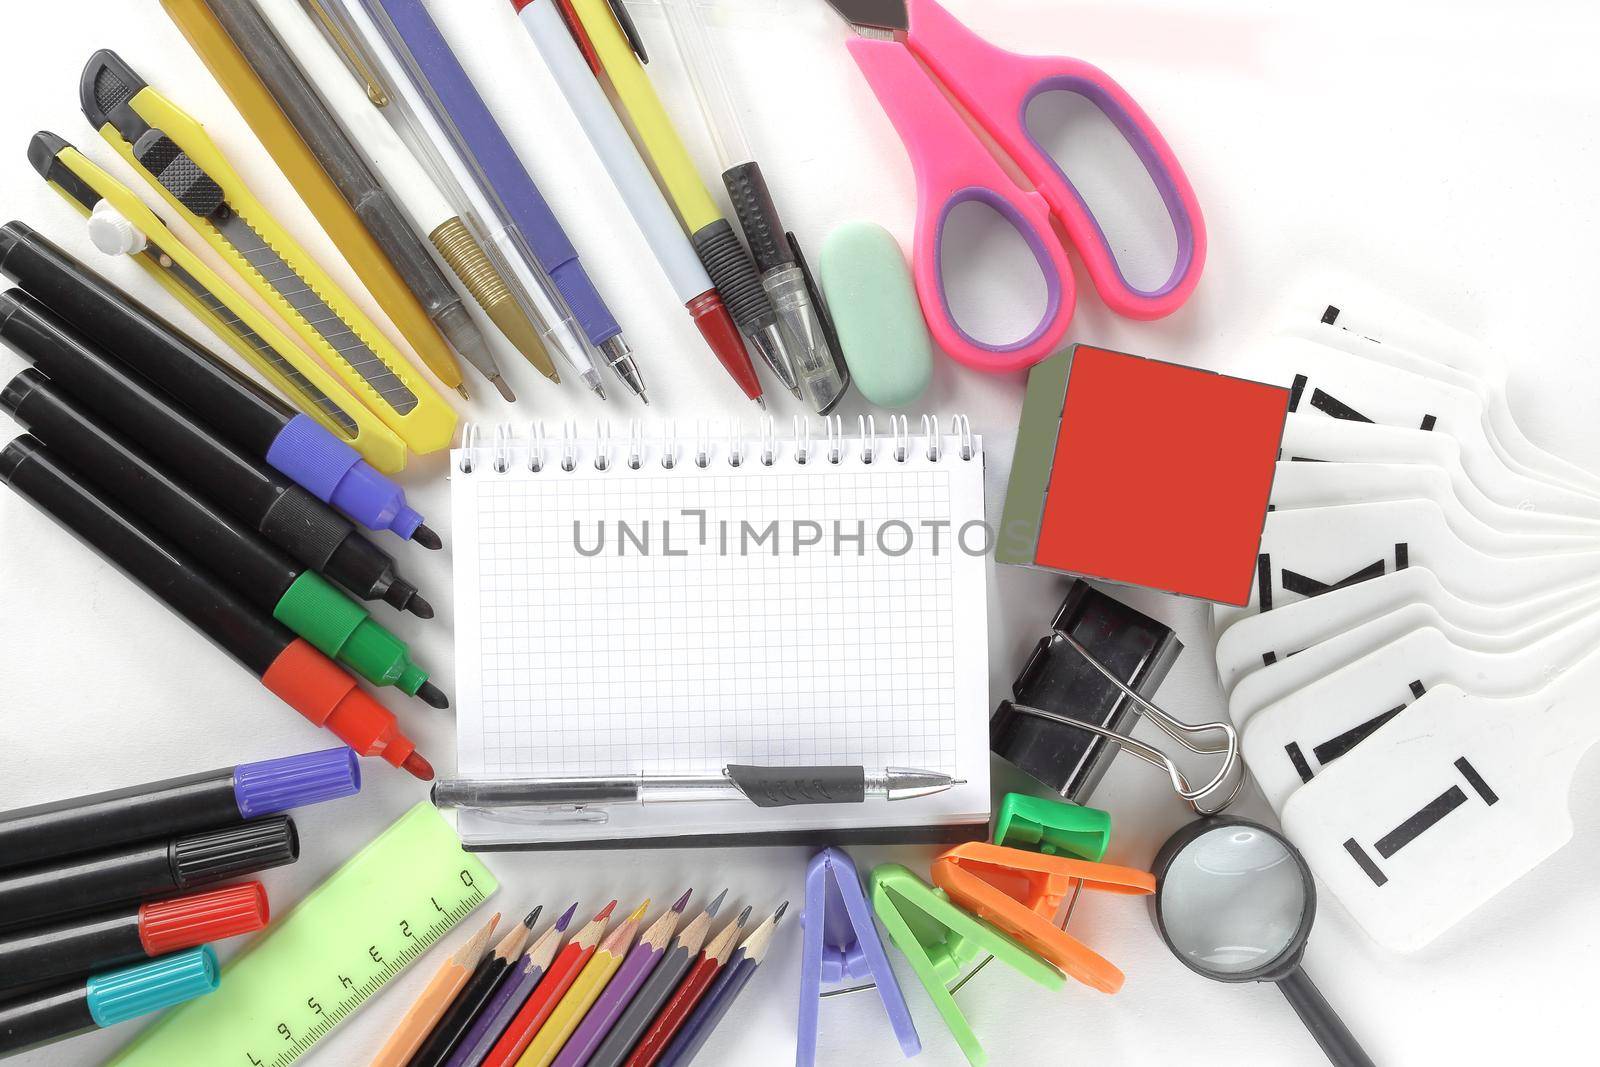 opened Notepad and office supplies on white background.photo with copy space.